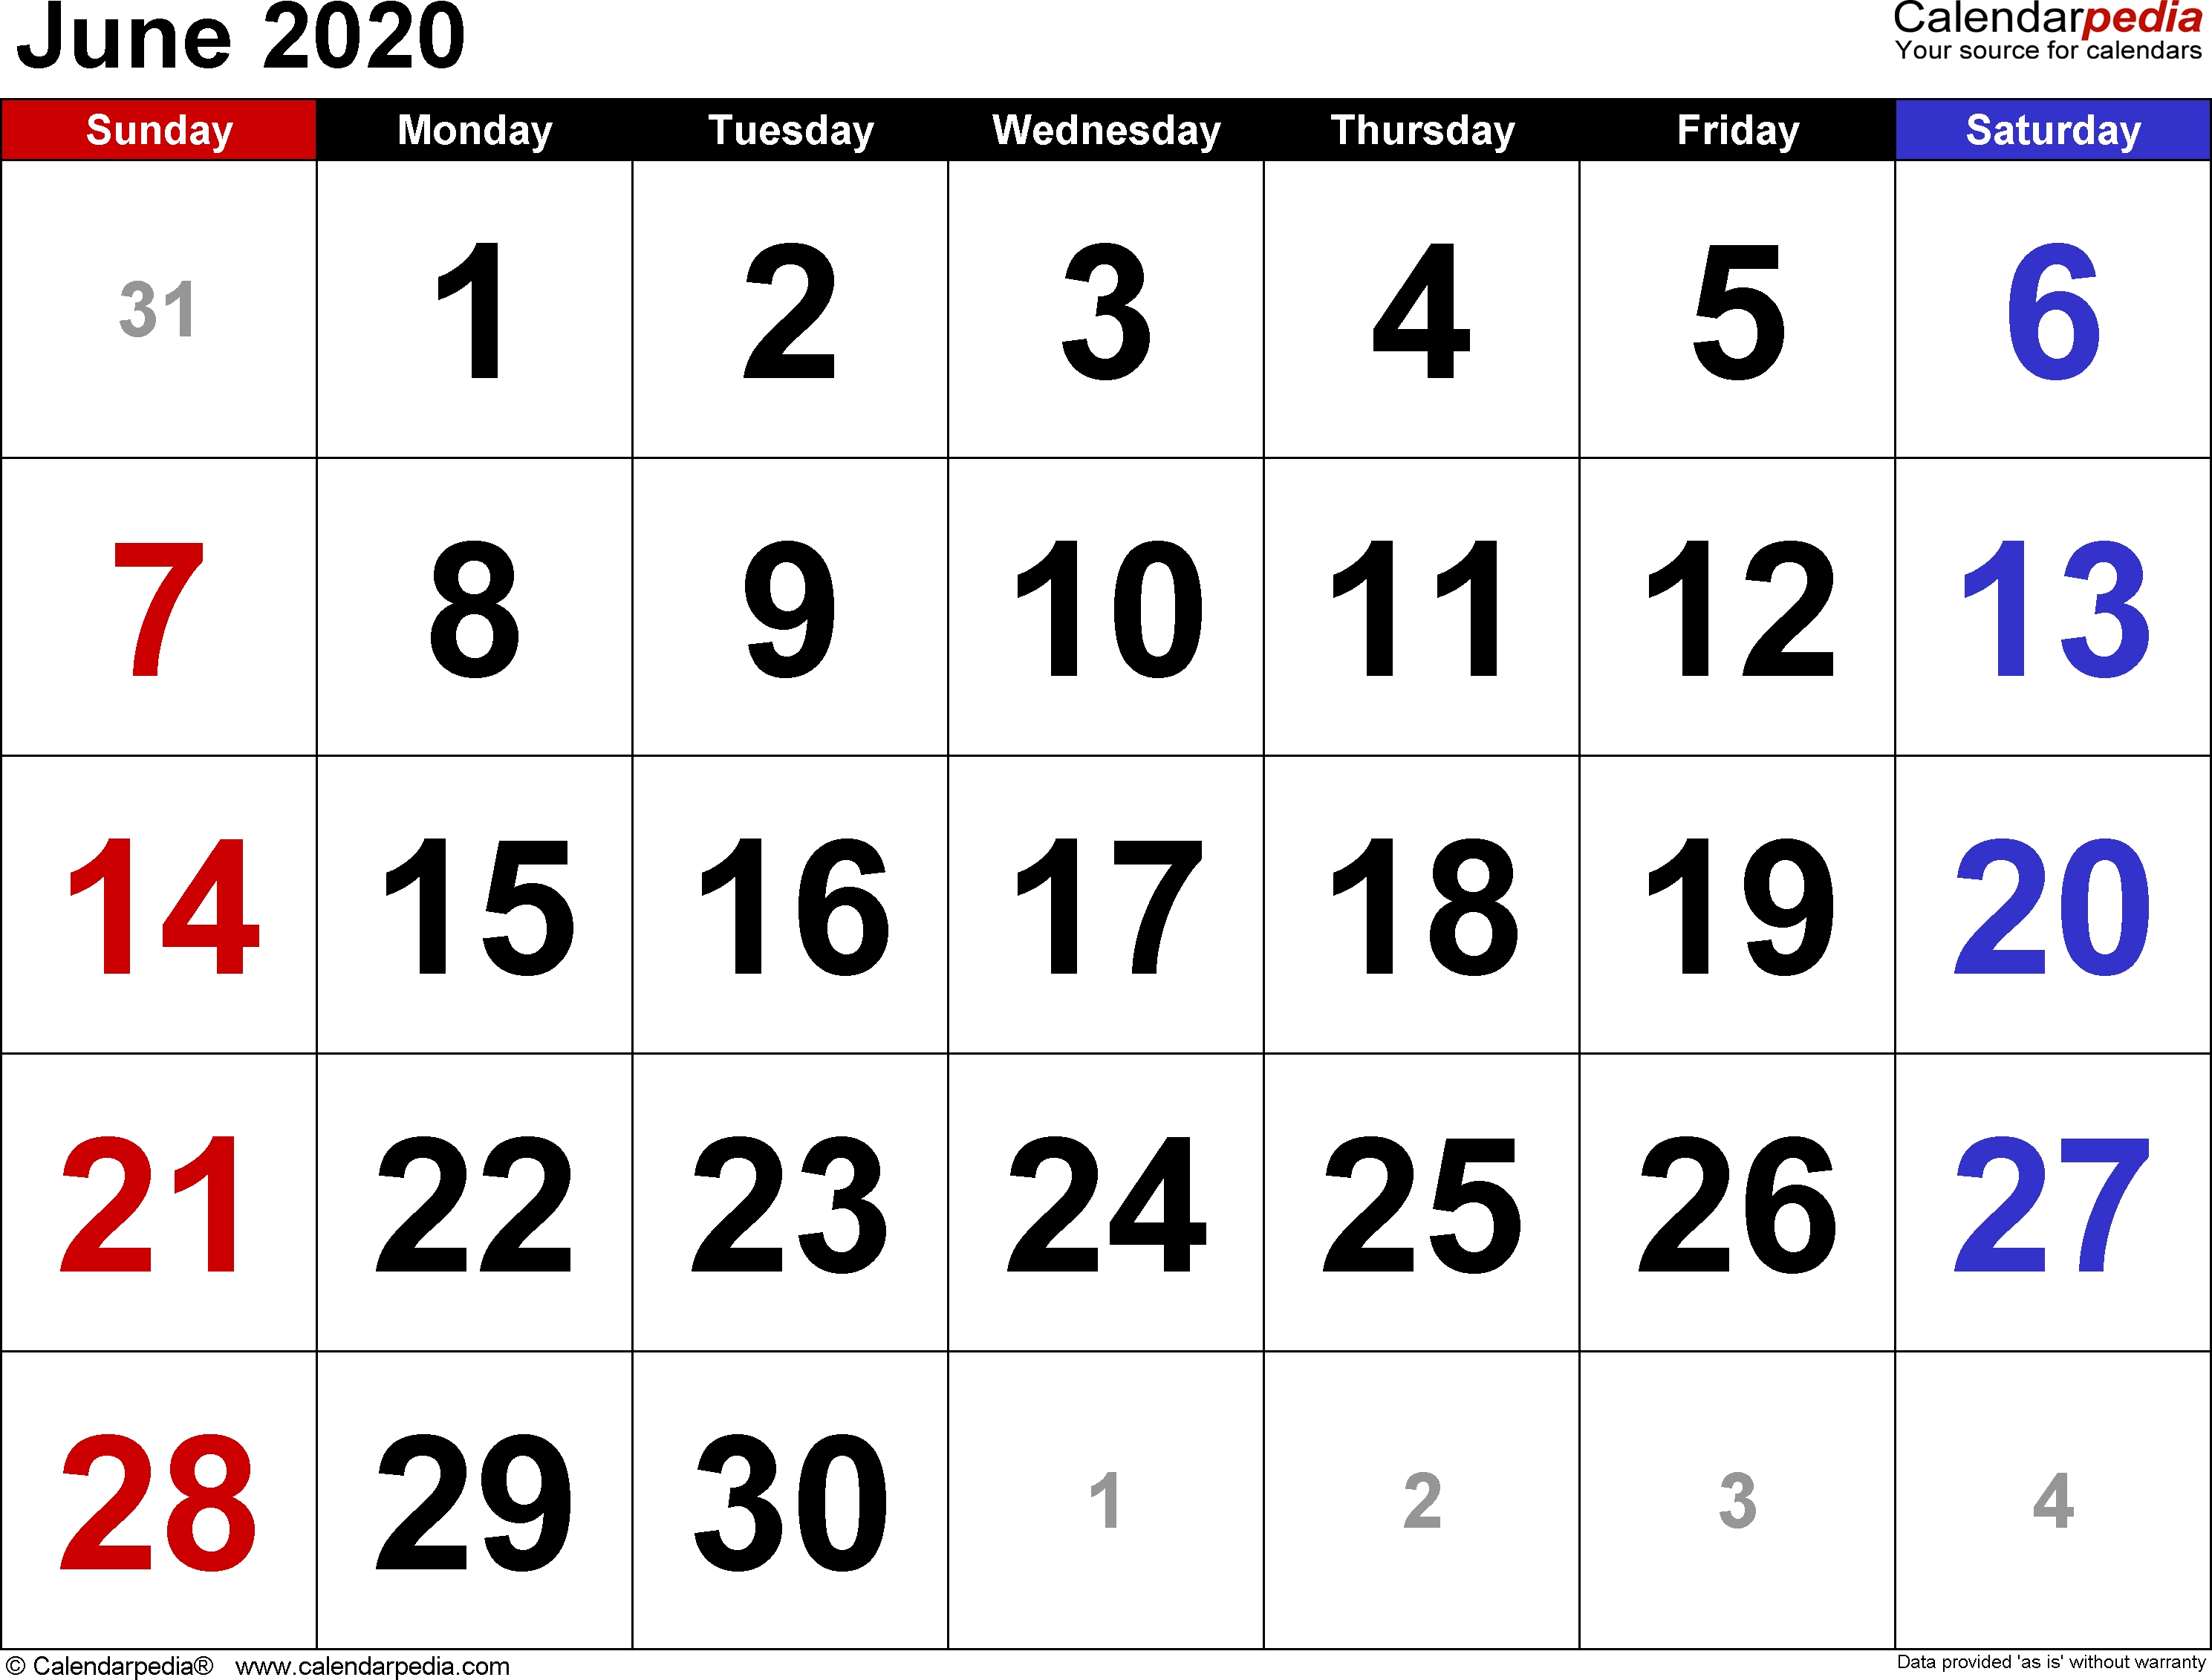 June 2020 Calendars For Word, Excel &amp; Pdf-Monthly Calendar Of June And July 2020